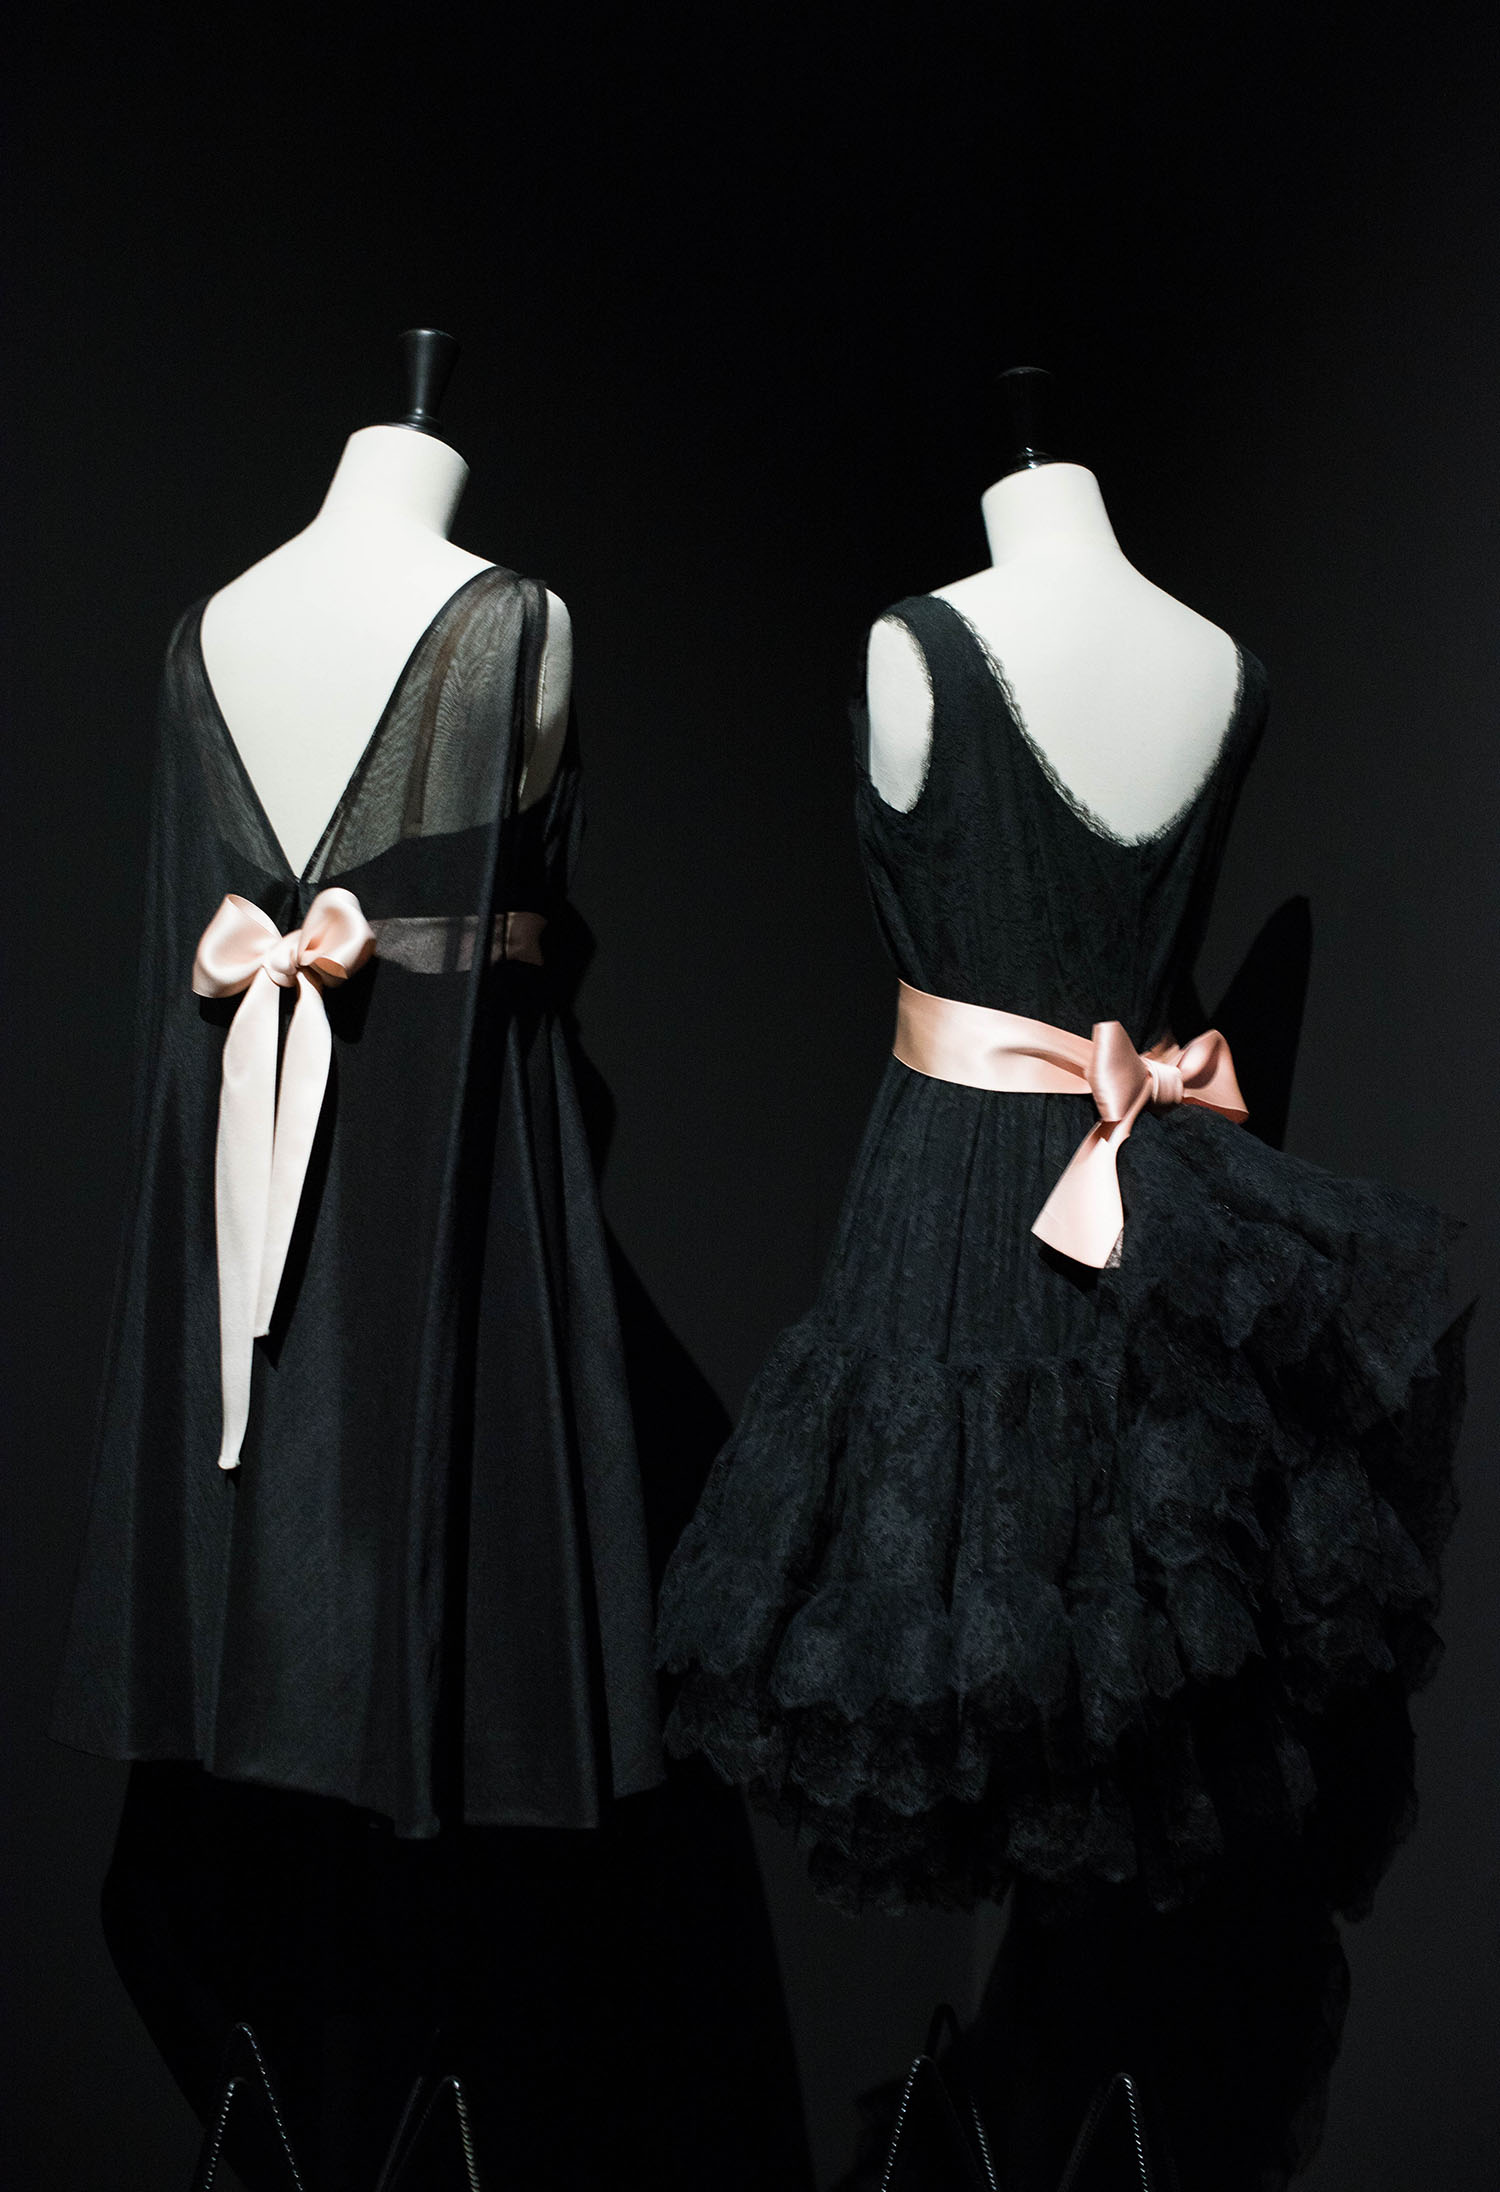 Black and blush gowns at the Balenciaga: L'Oeuvre au noir exhibit captured by travel blogger Cee Fardoe of Coco & Vera